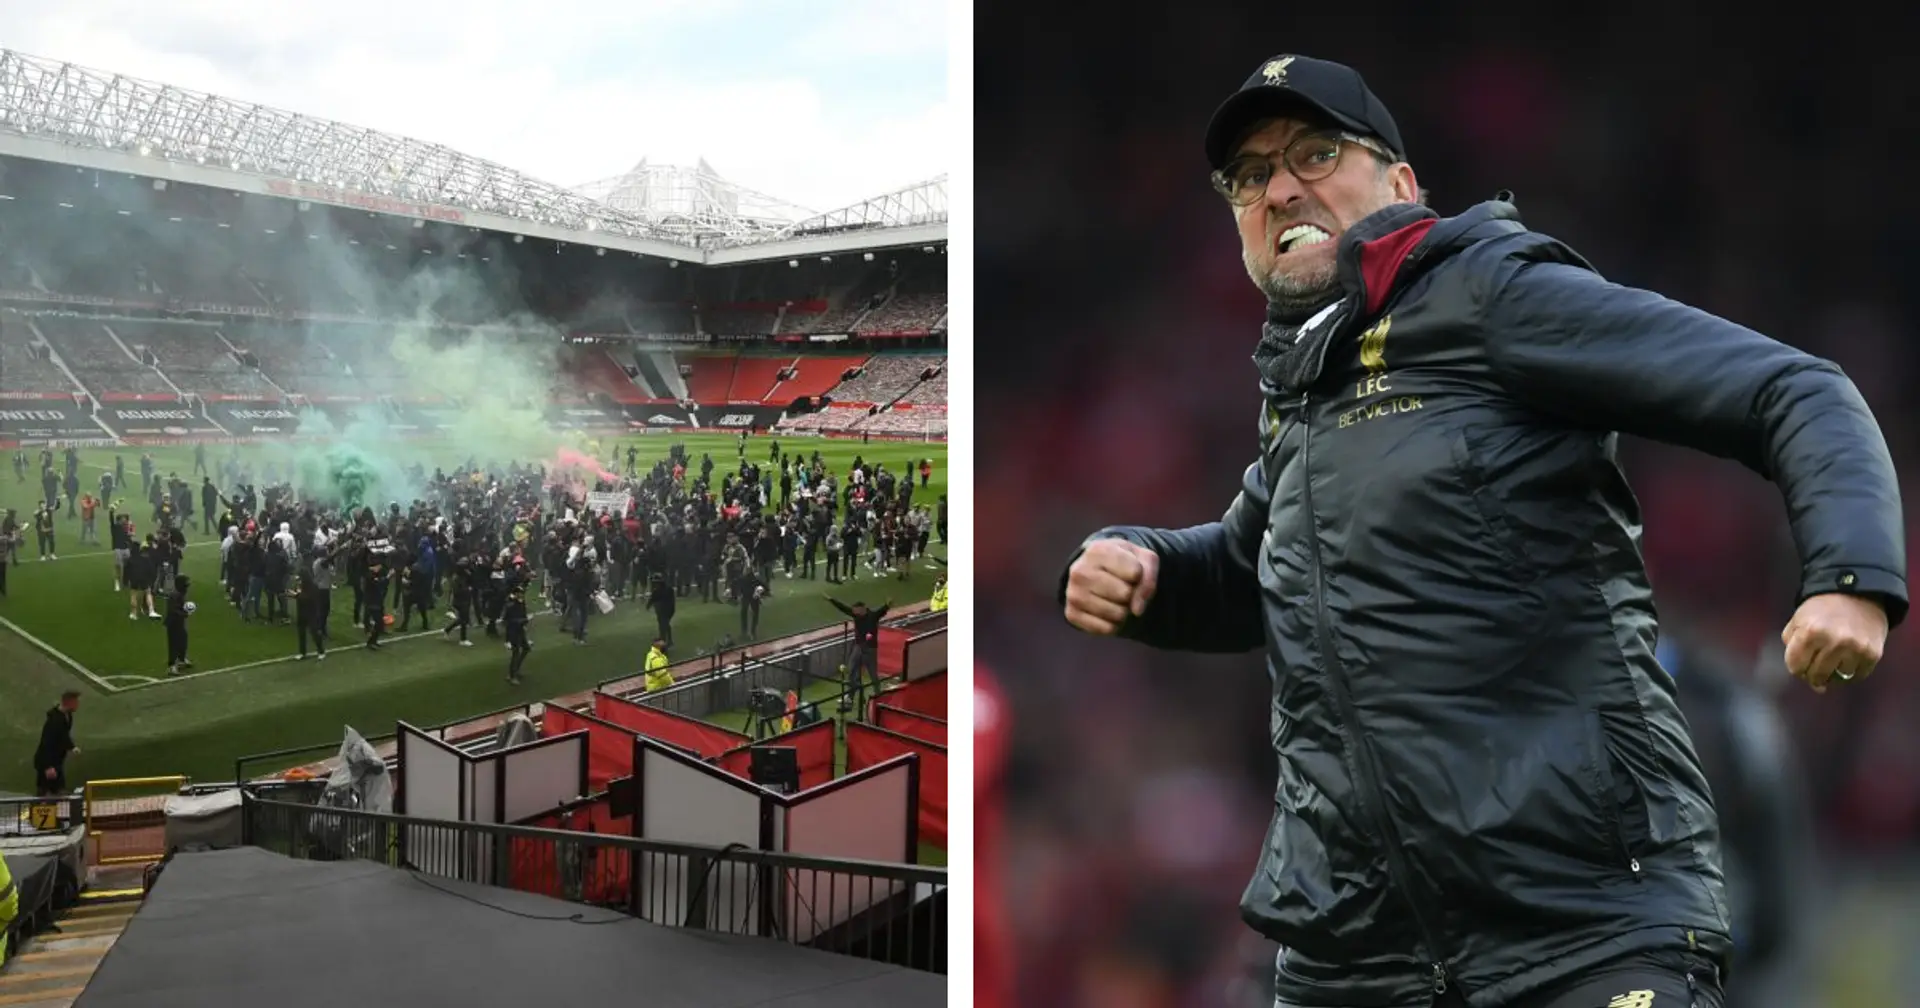 FA rule that could see Liverpool awarded all 3 points against Manchester United